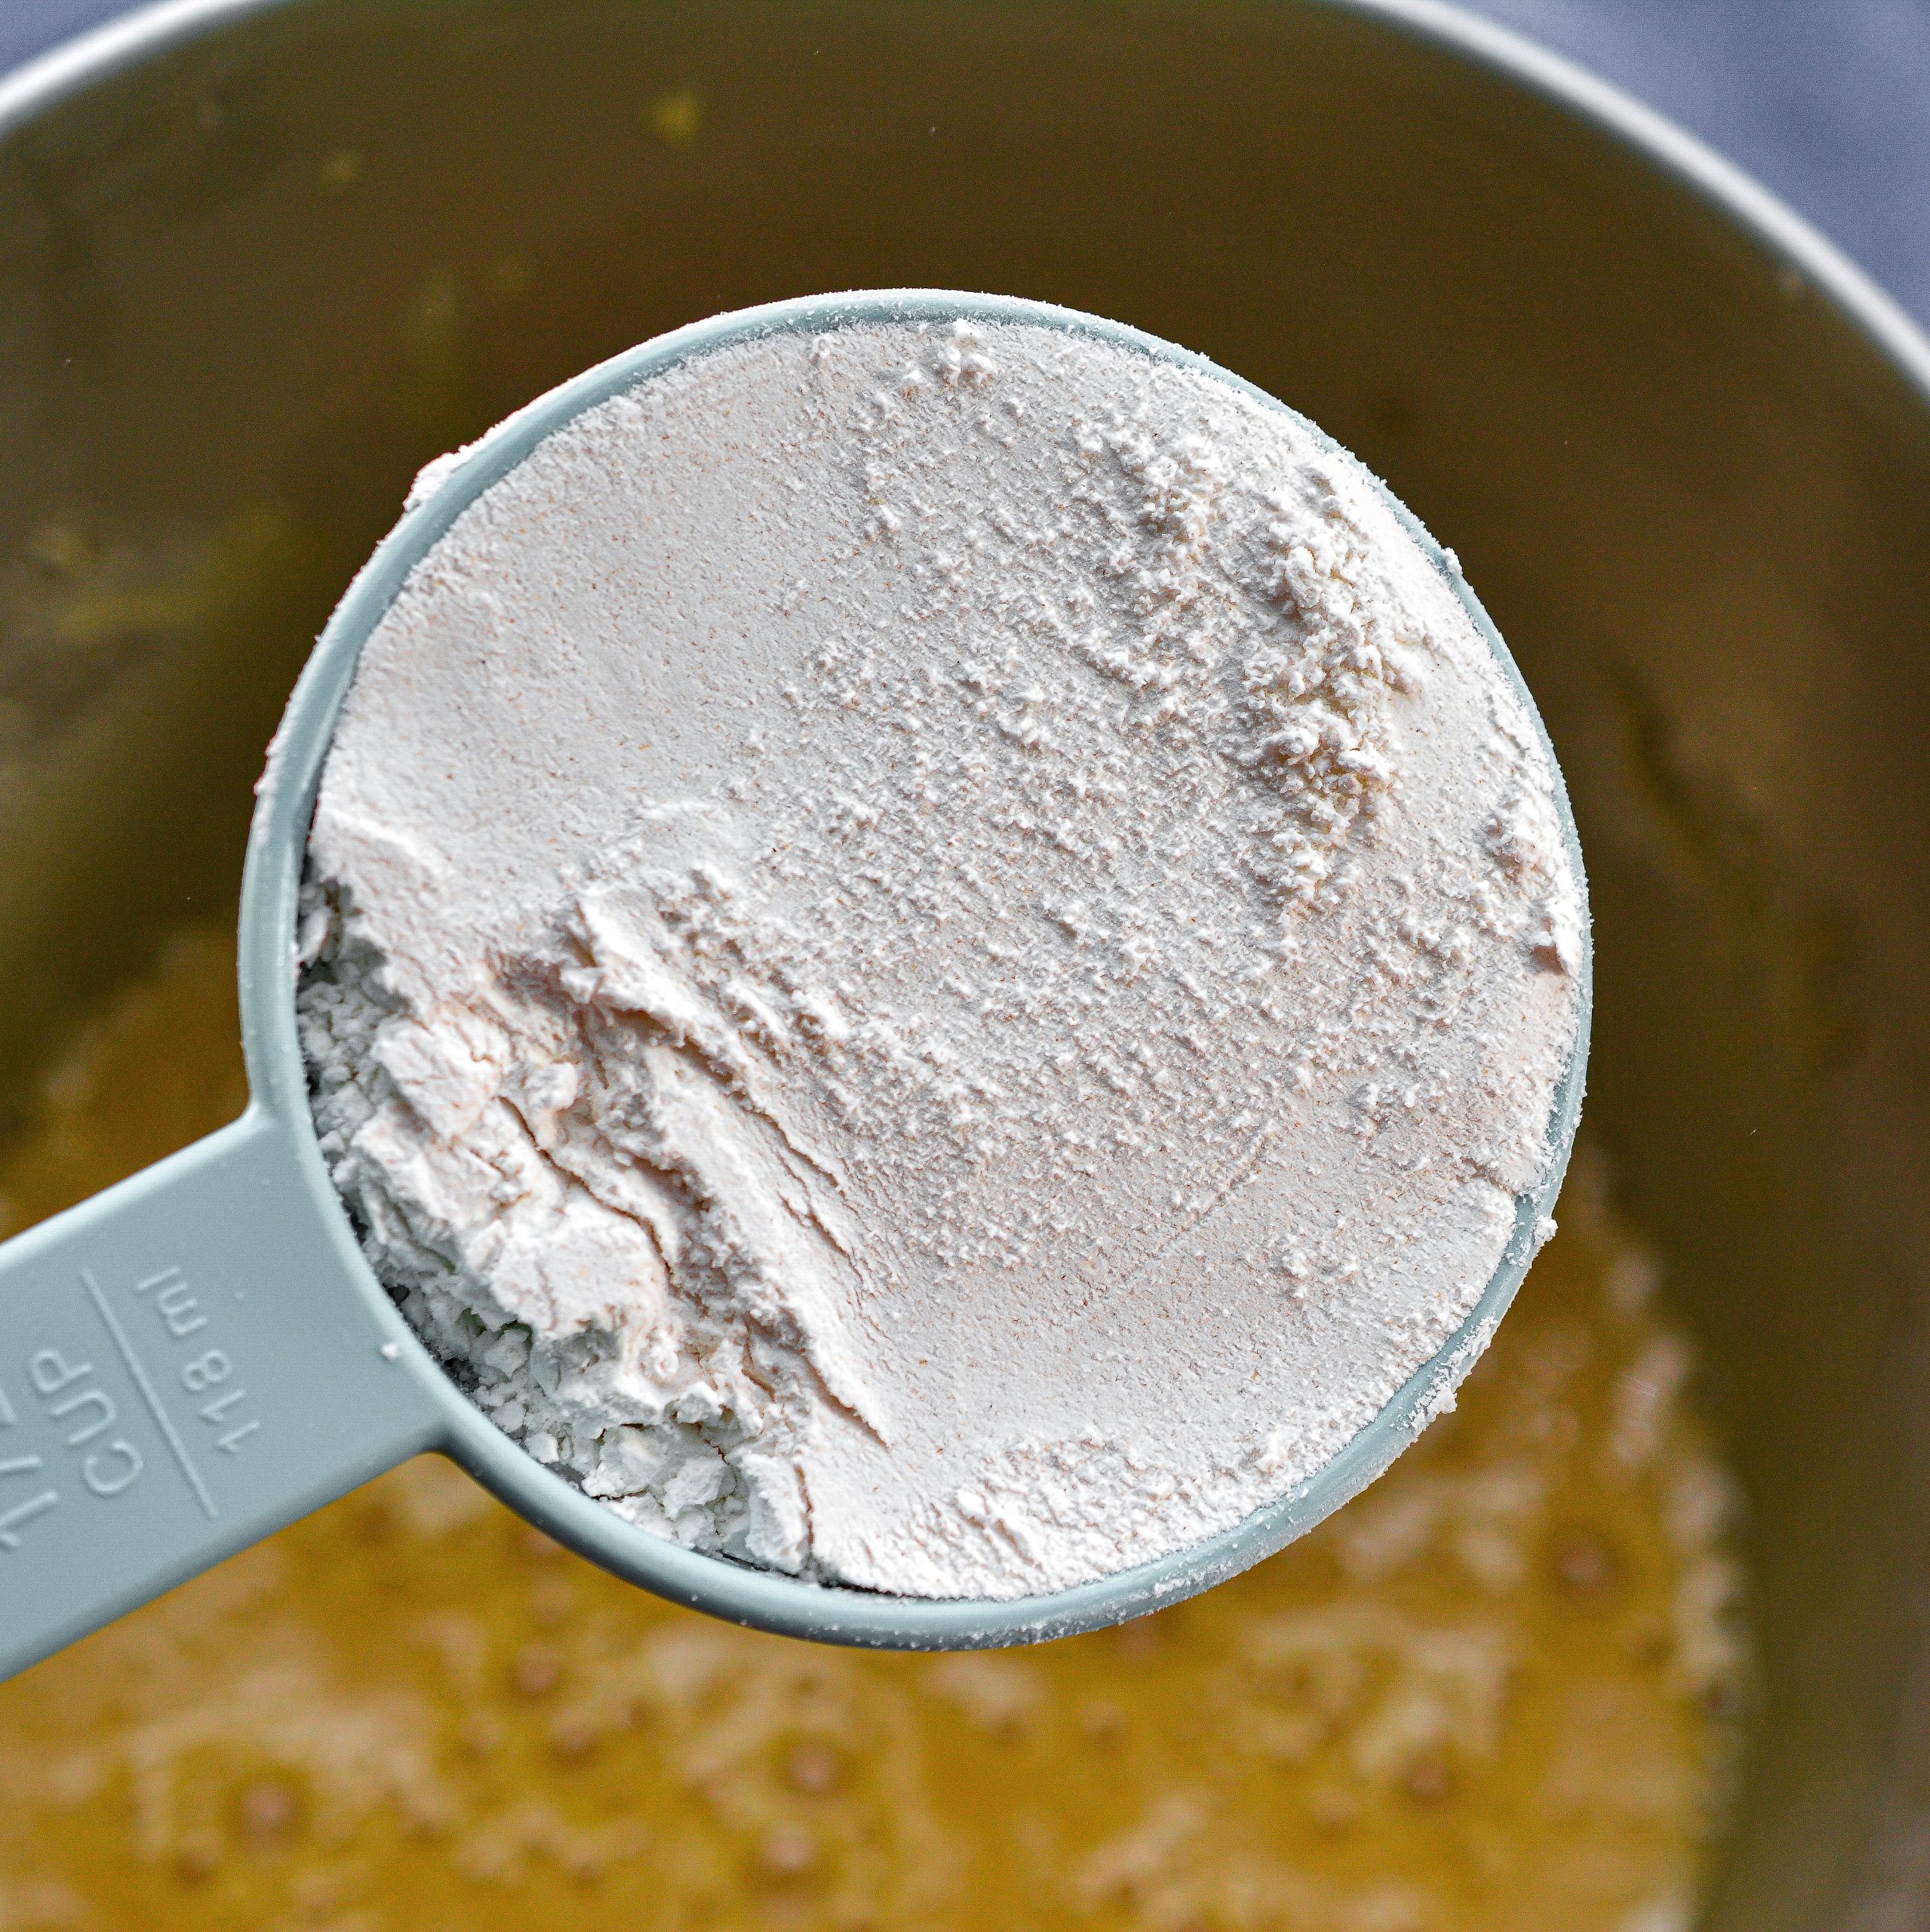 Add the 1 ½ cups of self-rising flour to the mixing bowl.